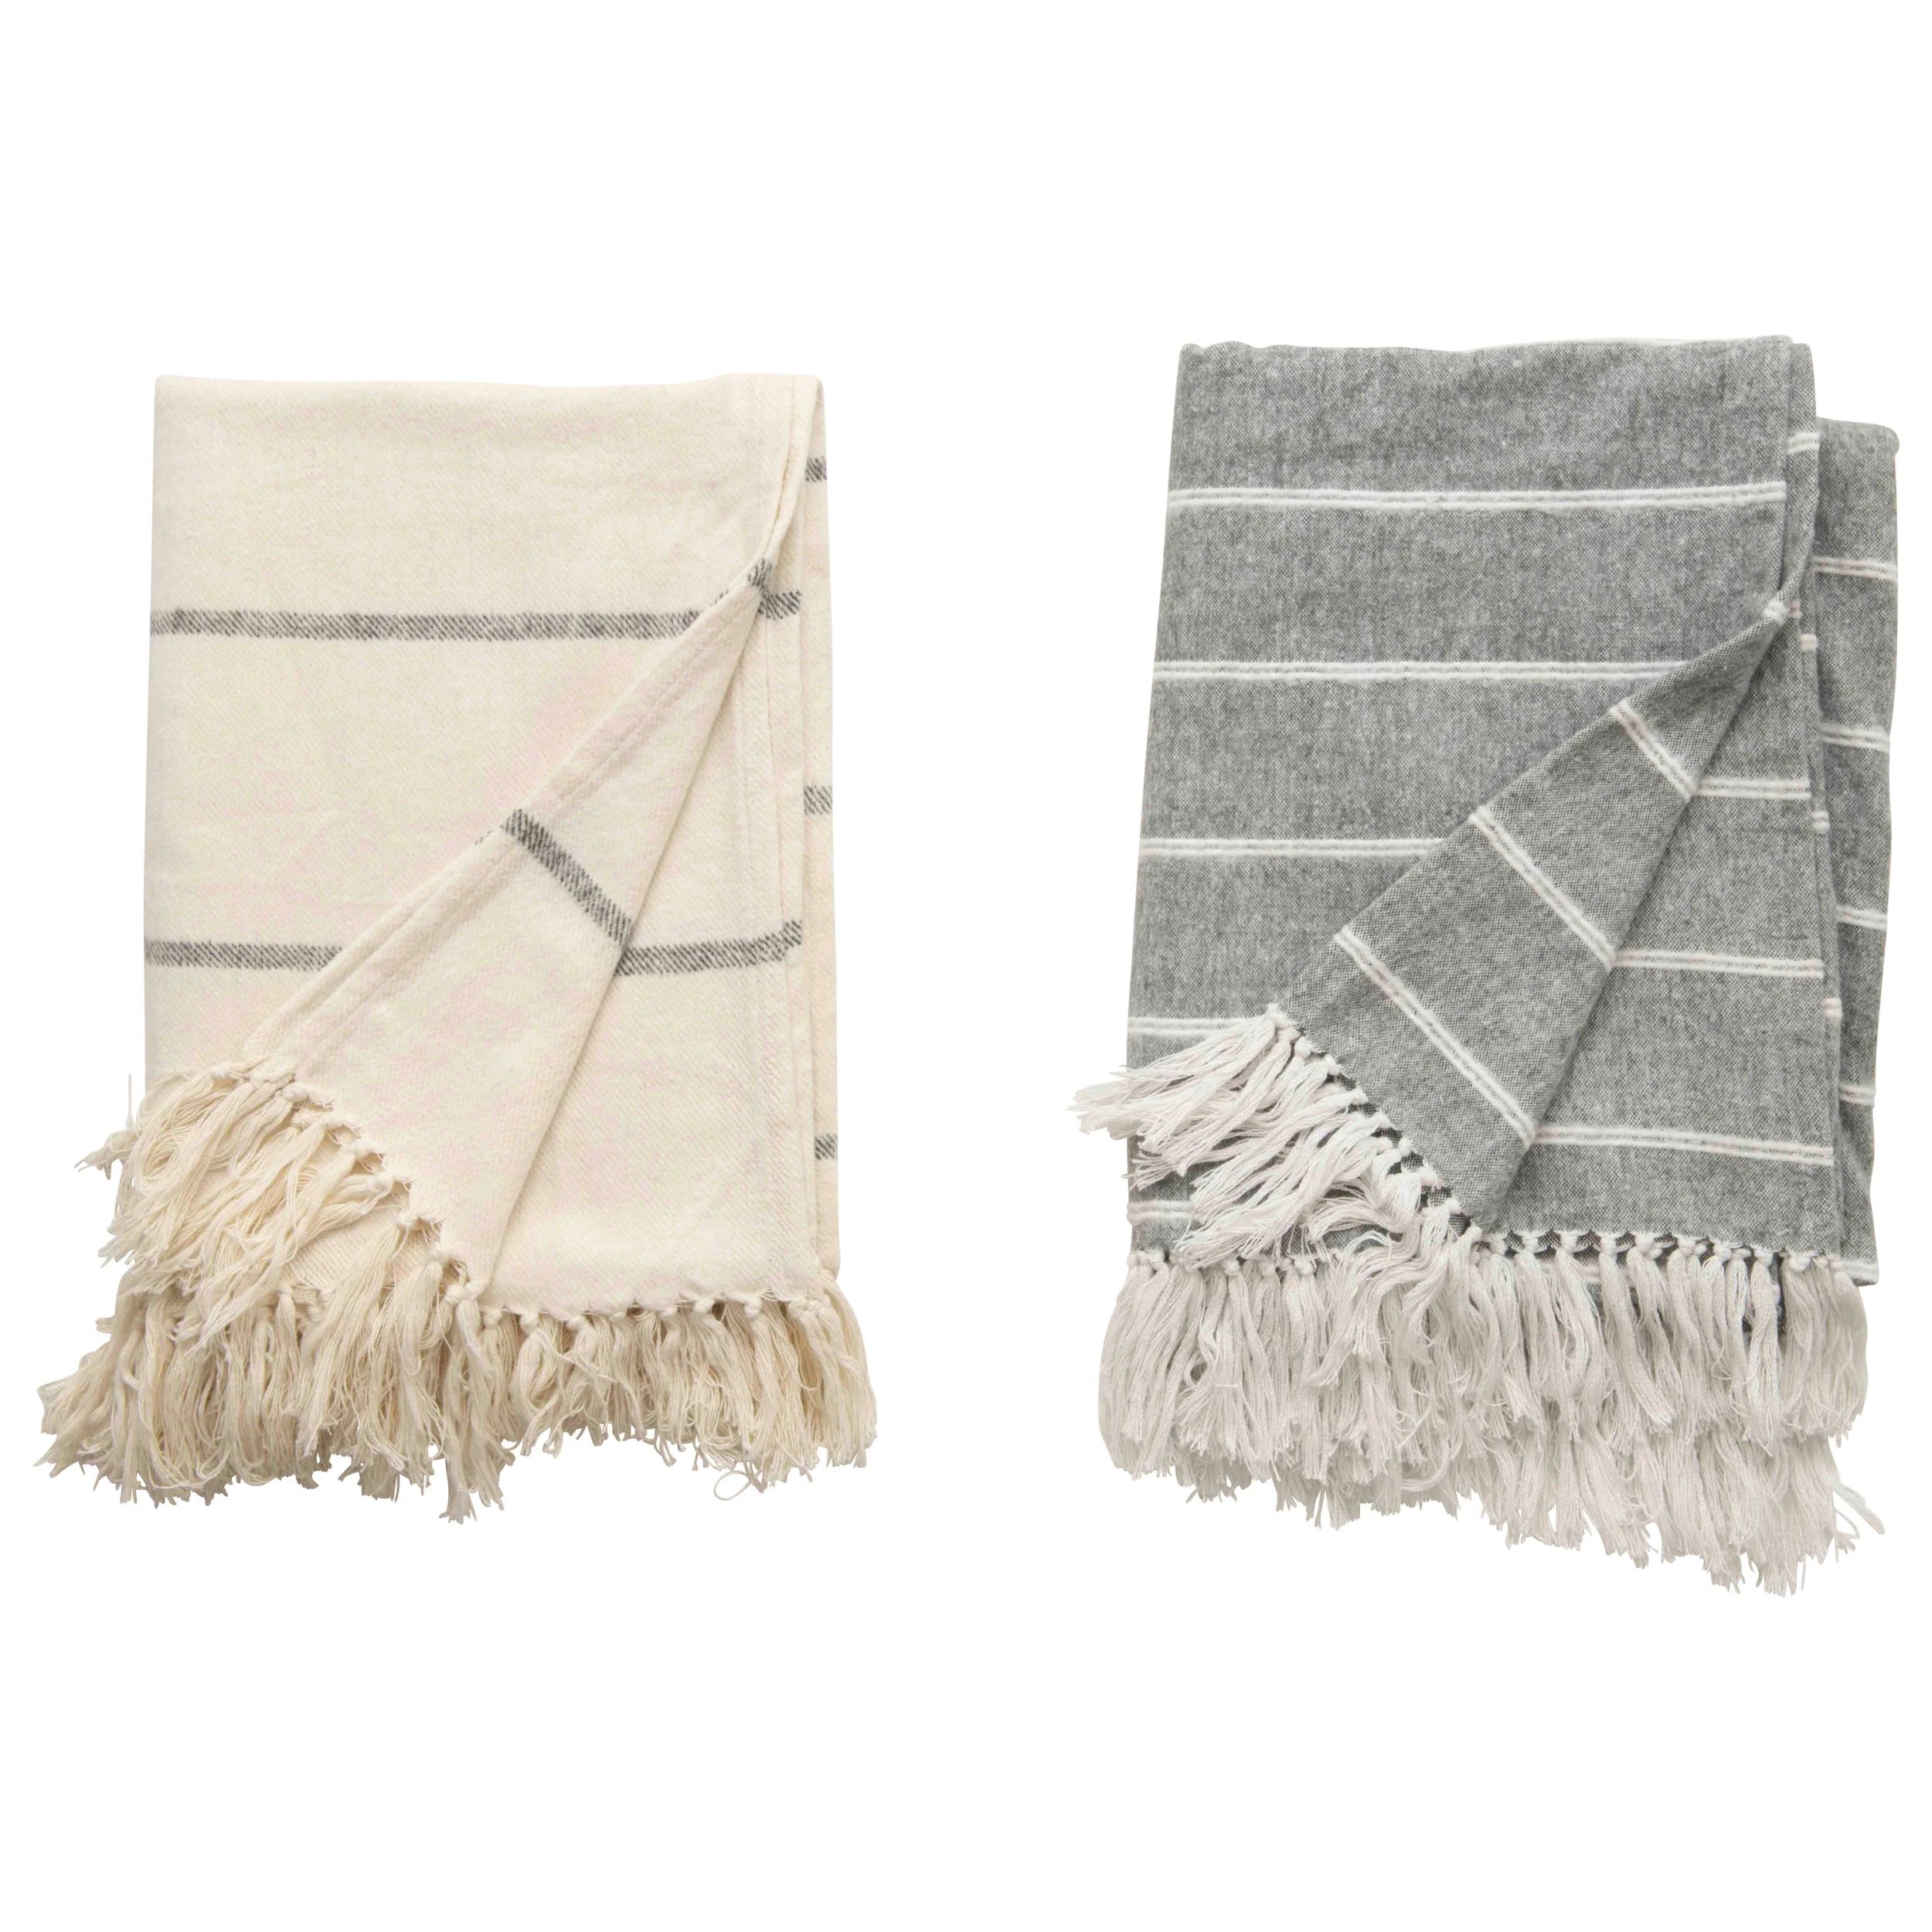 Striped Throw with Fringe, 2 Styles | Sweenshots Studios